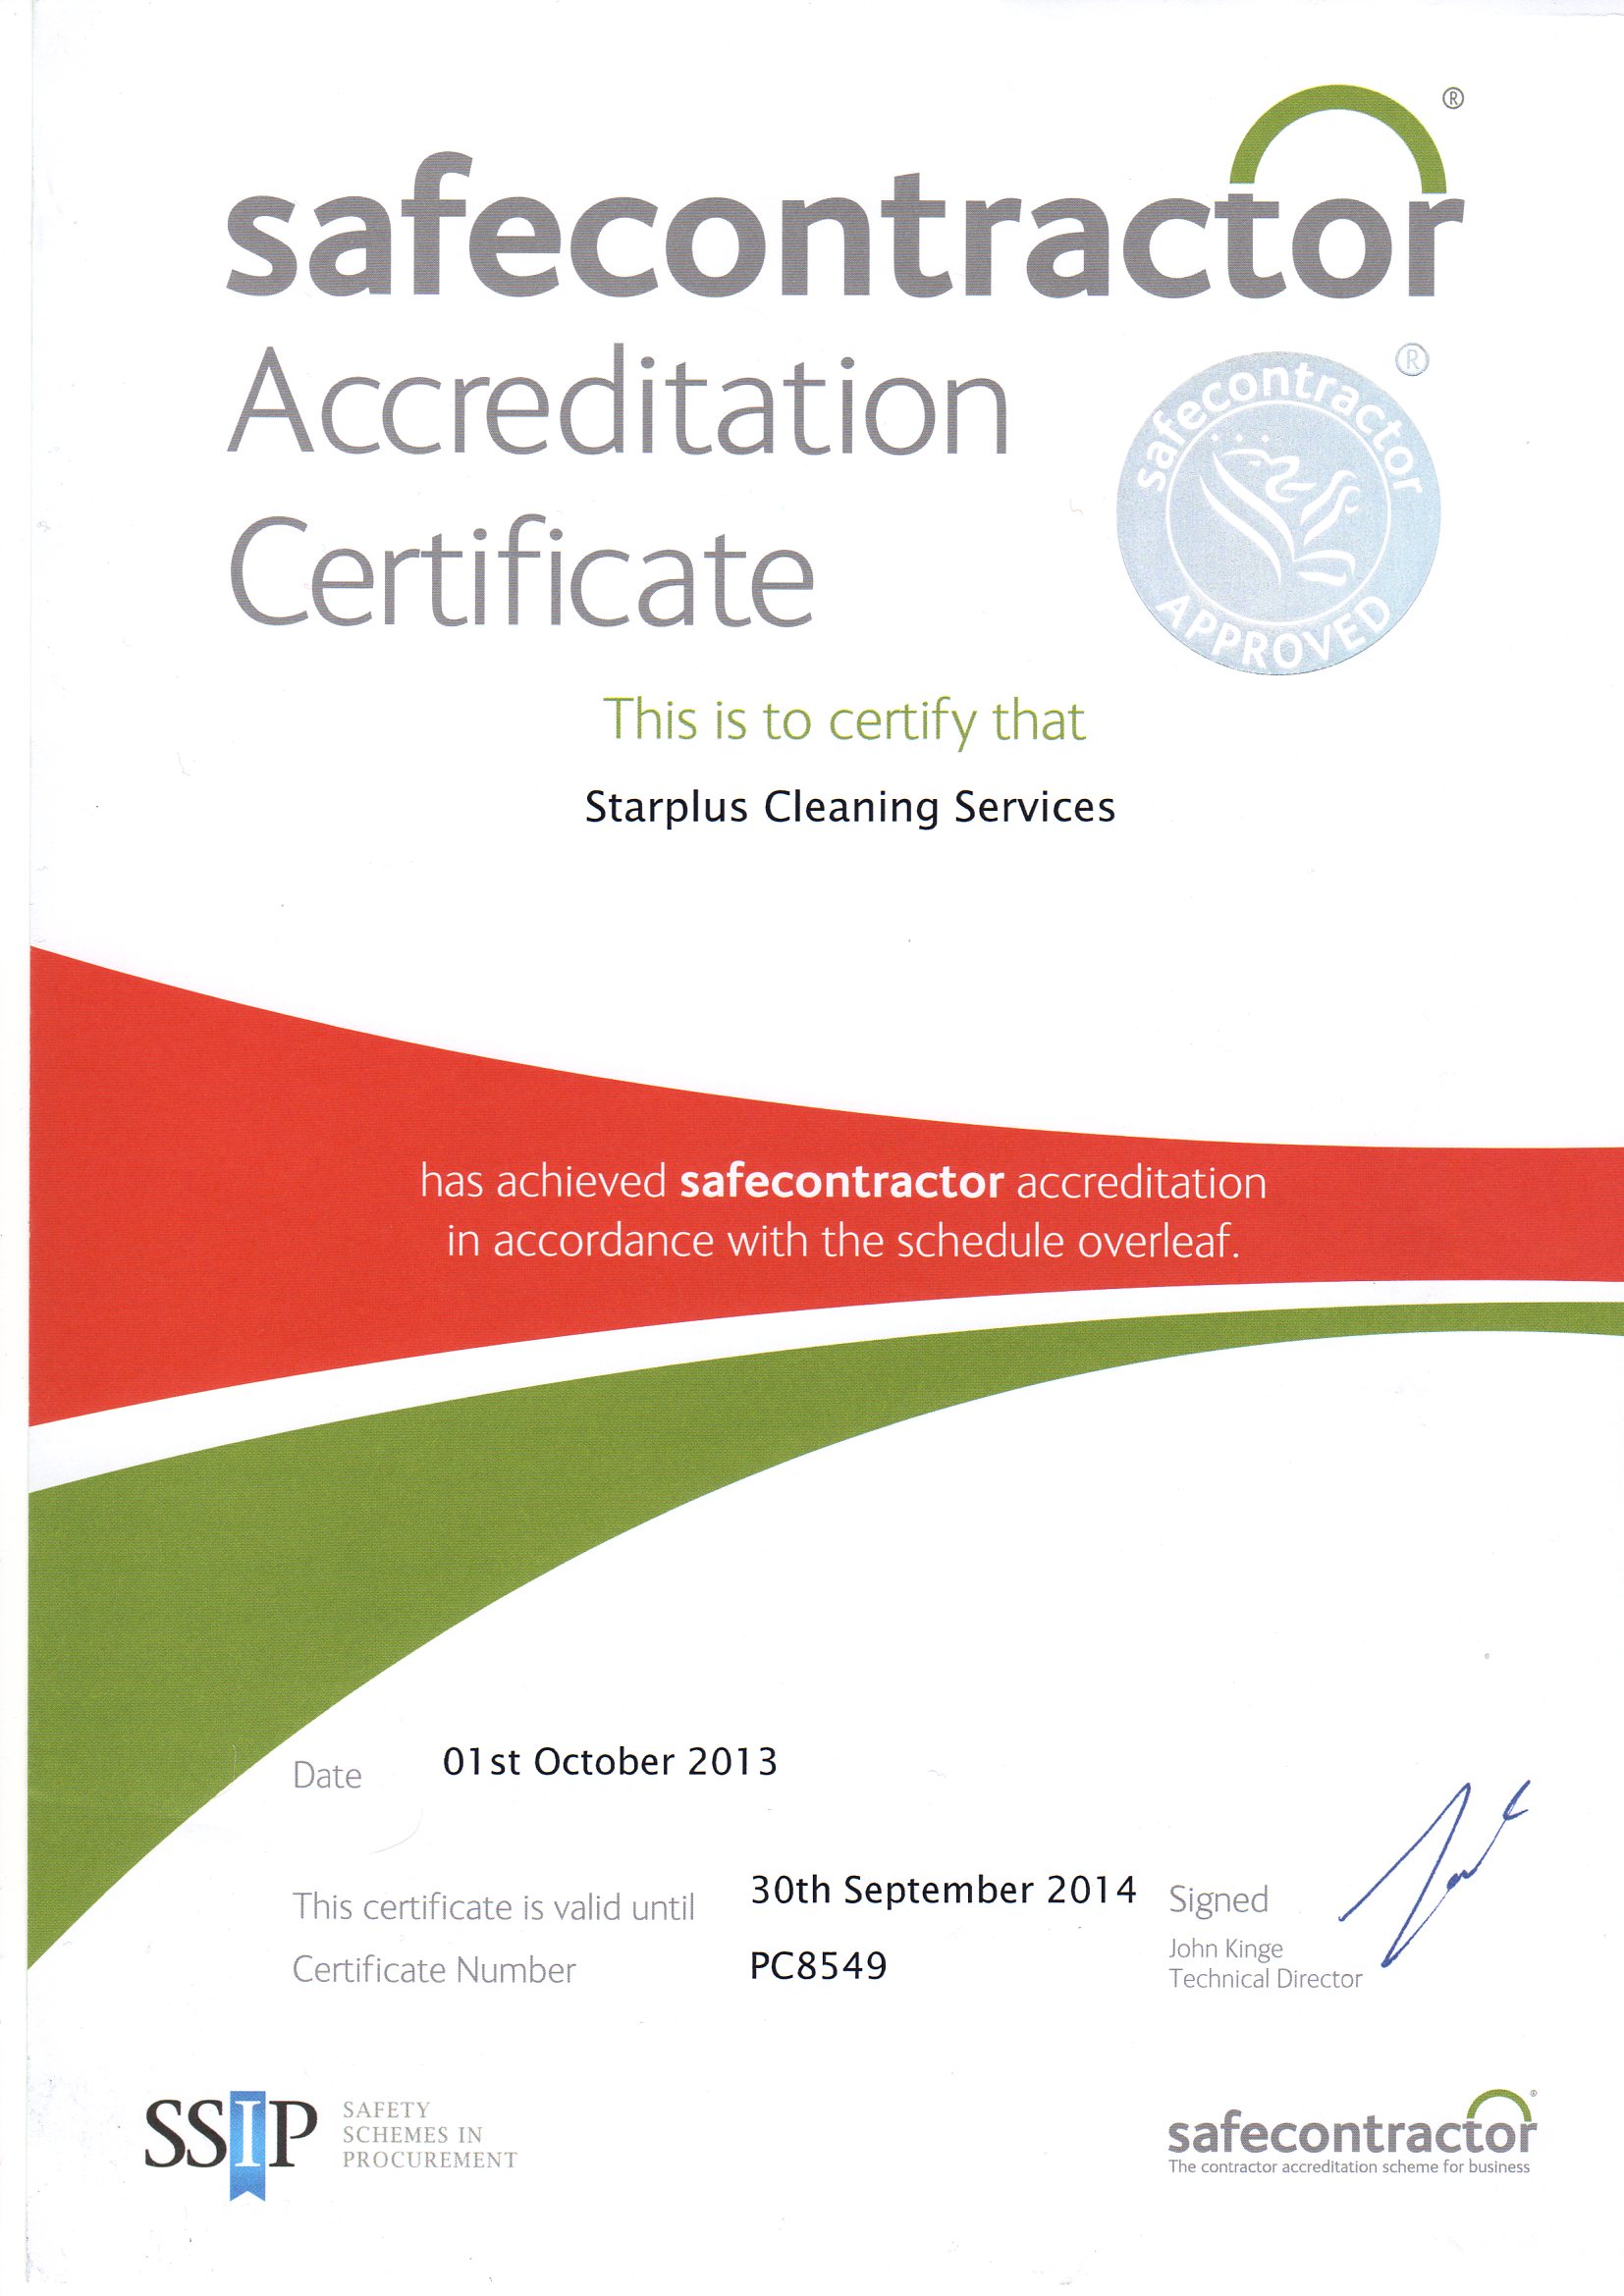 Safe contractor accreditation 2013